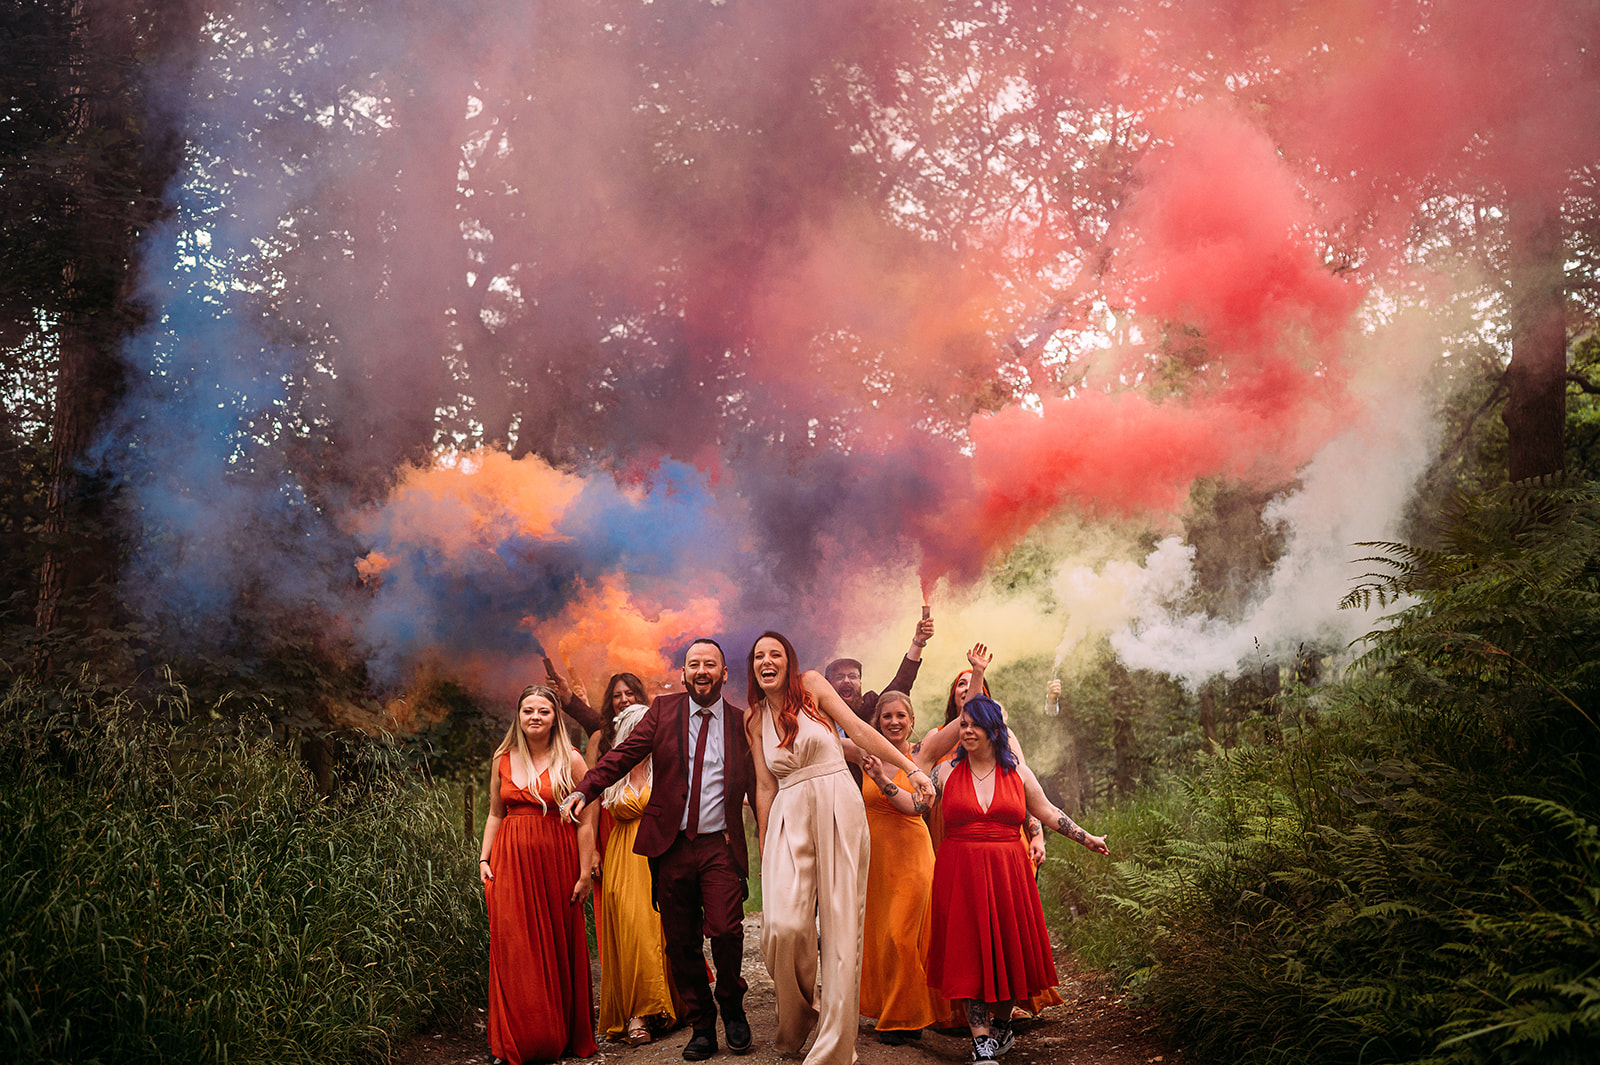 The wedding party walk through the woods with colourful smoke flares.